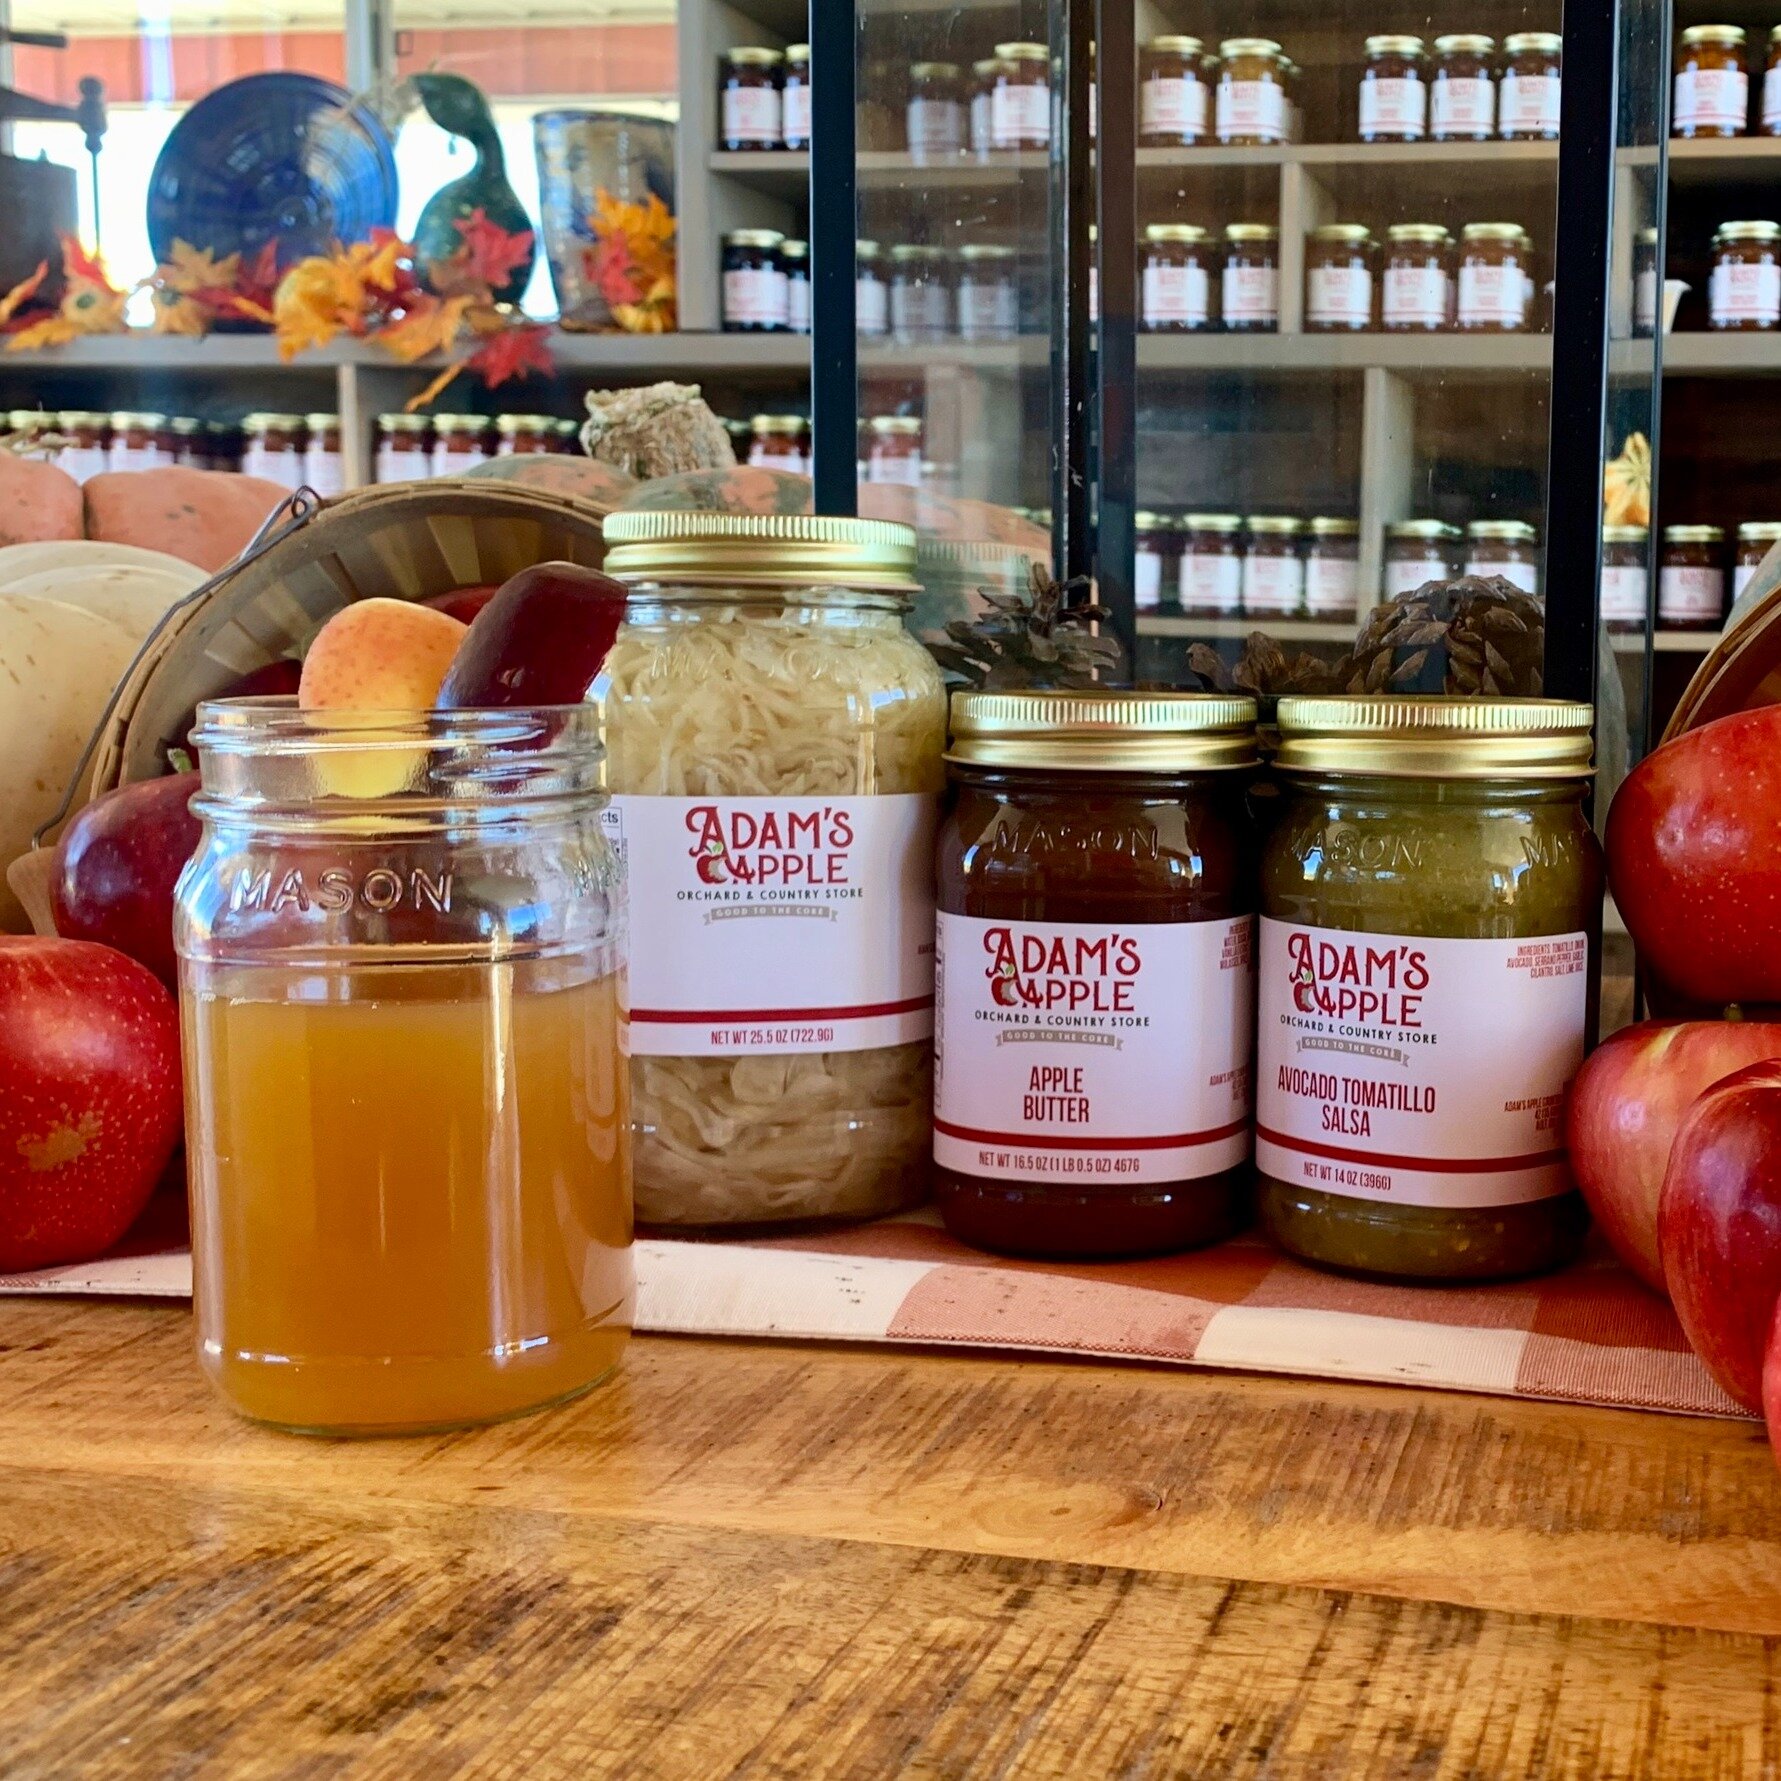 * OPEN TODAY 10-4 -  APPLE CIDER - ALL APPLES $1/POUND *
Adam's Apple Orchard and Country Store will be open today - Saturday, November 18.  We have FRESH PRESSED APPLE CIDER. All remaining APPLES $1 PER POUND.  Get your favorites before THANKSGIVING